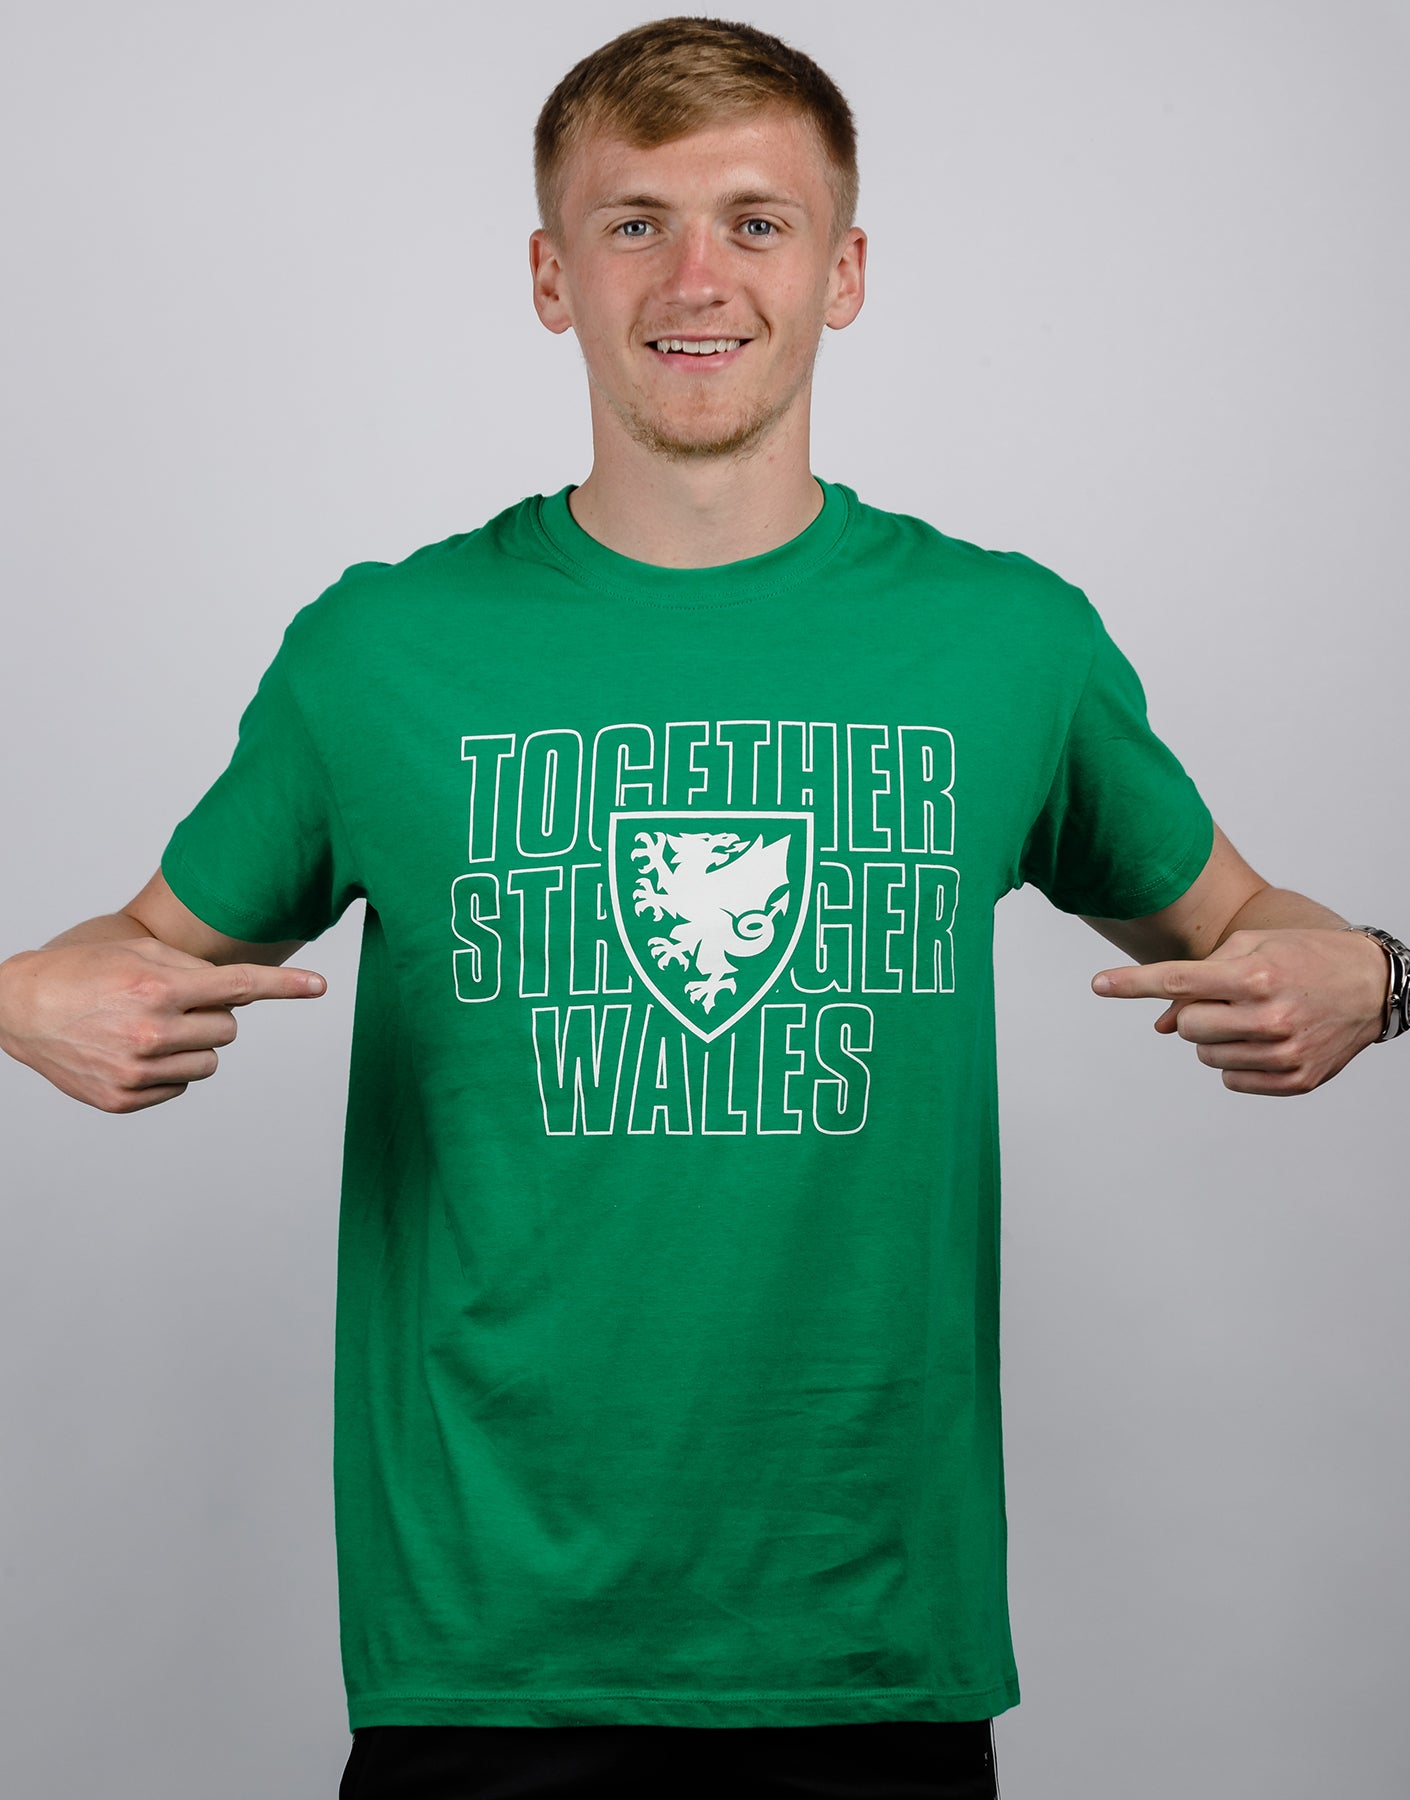 Official Team Wales 'Together Stronger' T-Shirt - Green - The World Football Store